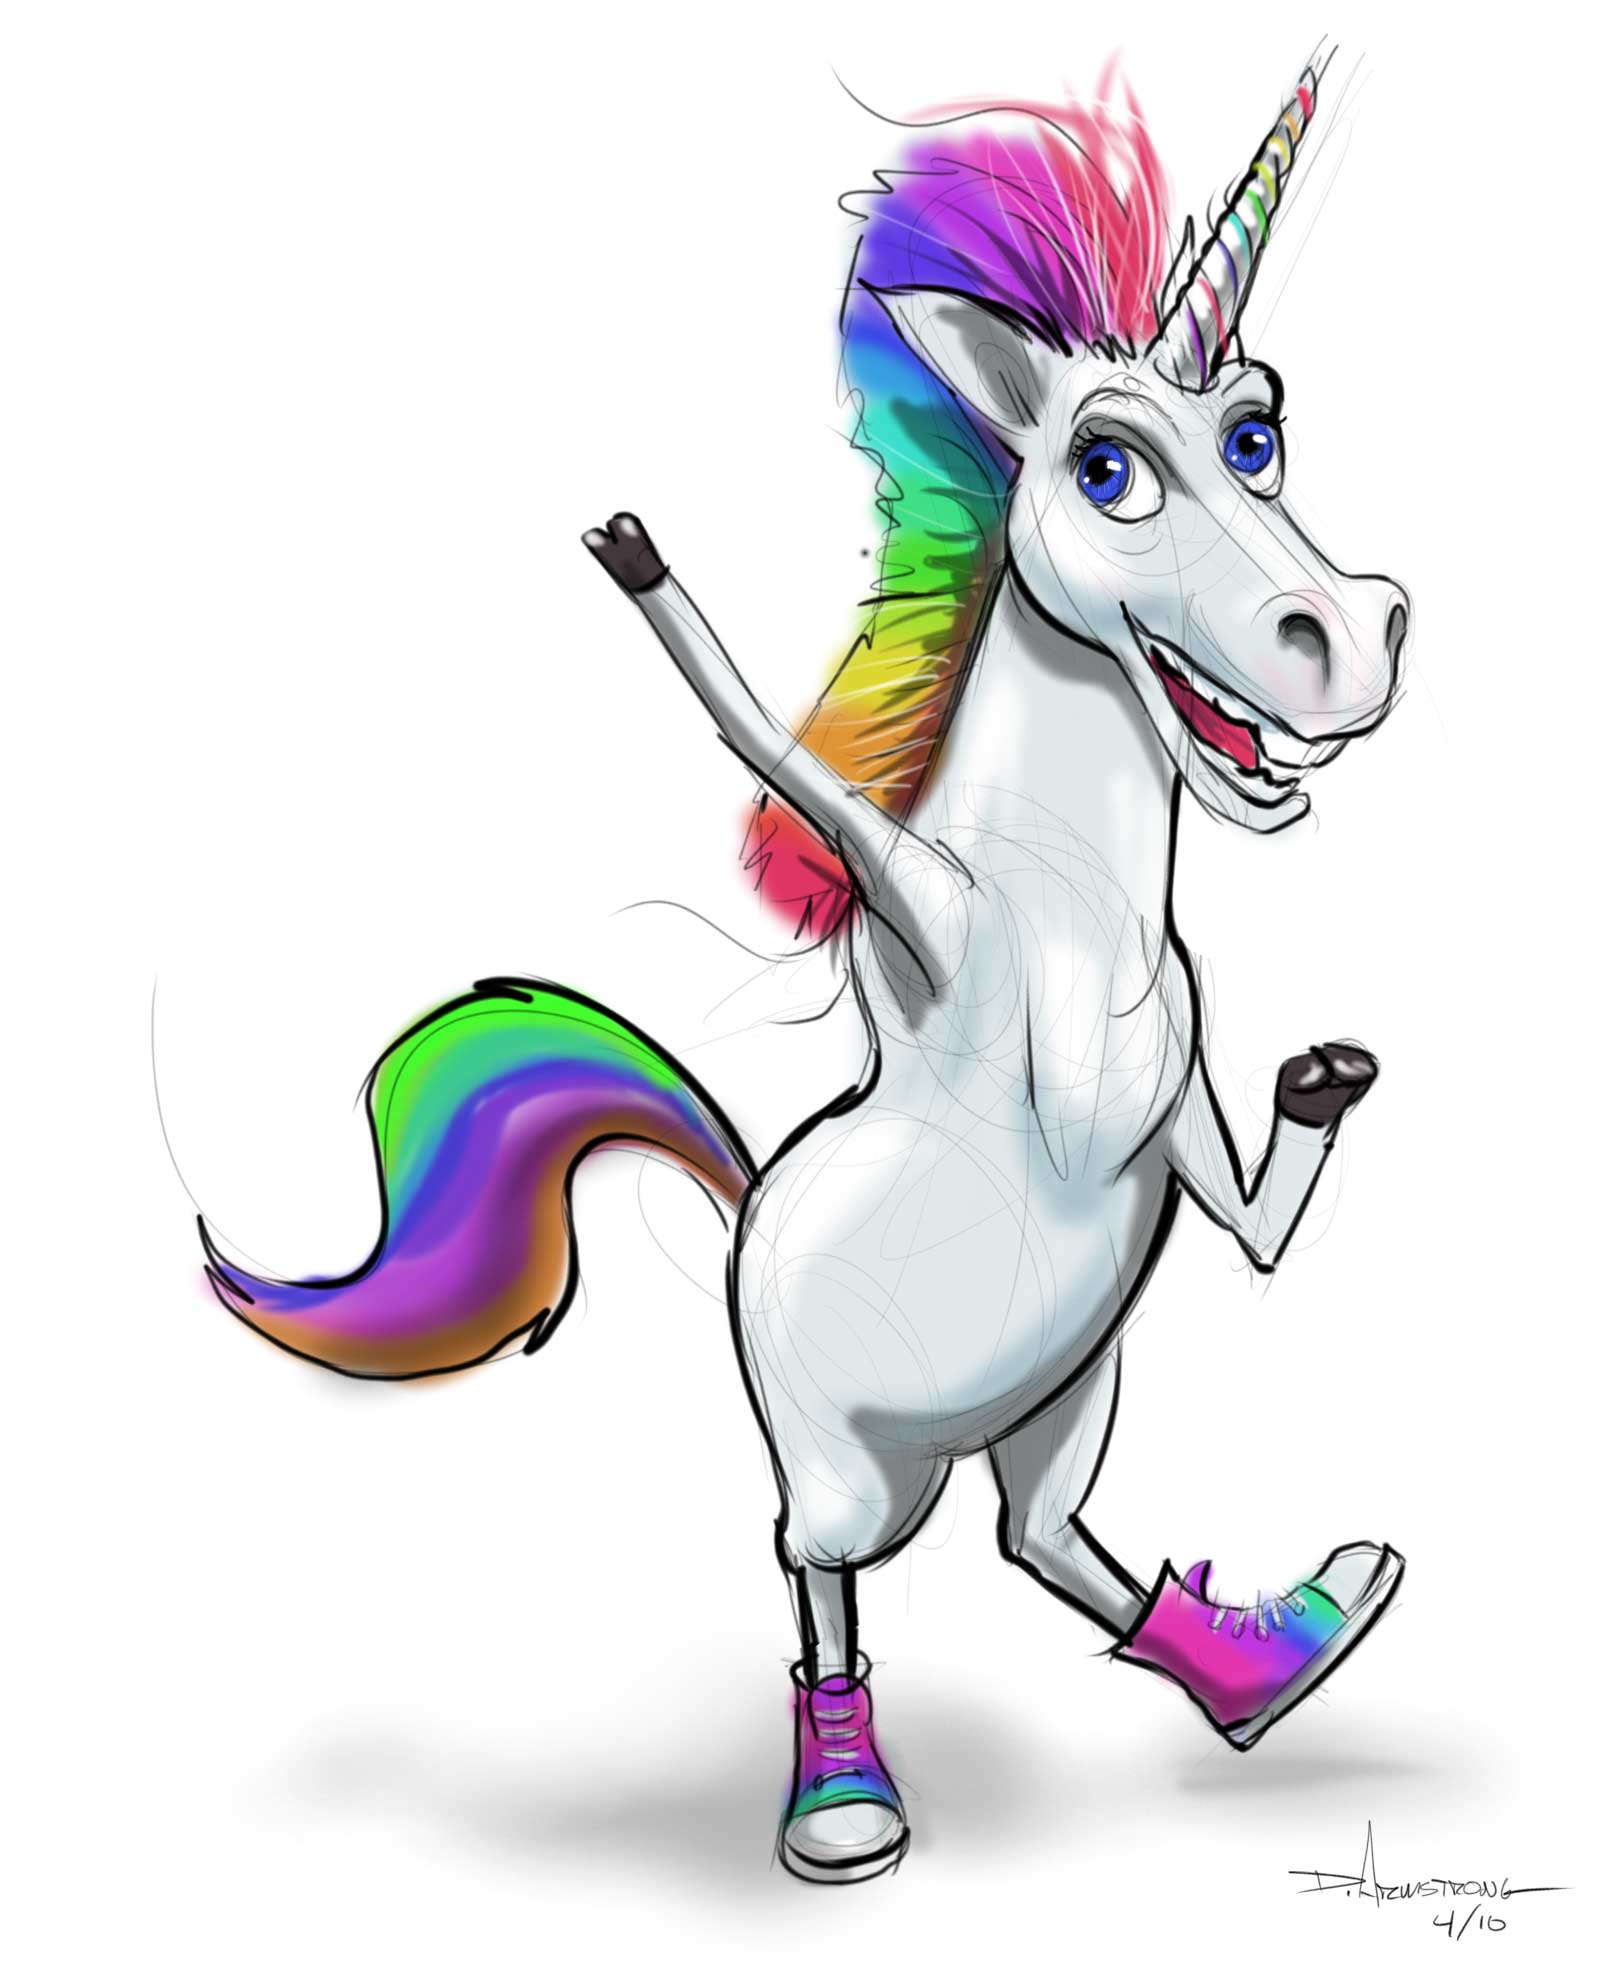 Animated Unicorn Yes that is a unicorn with